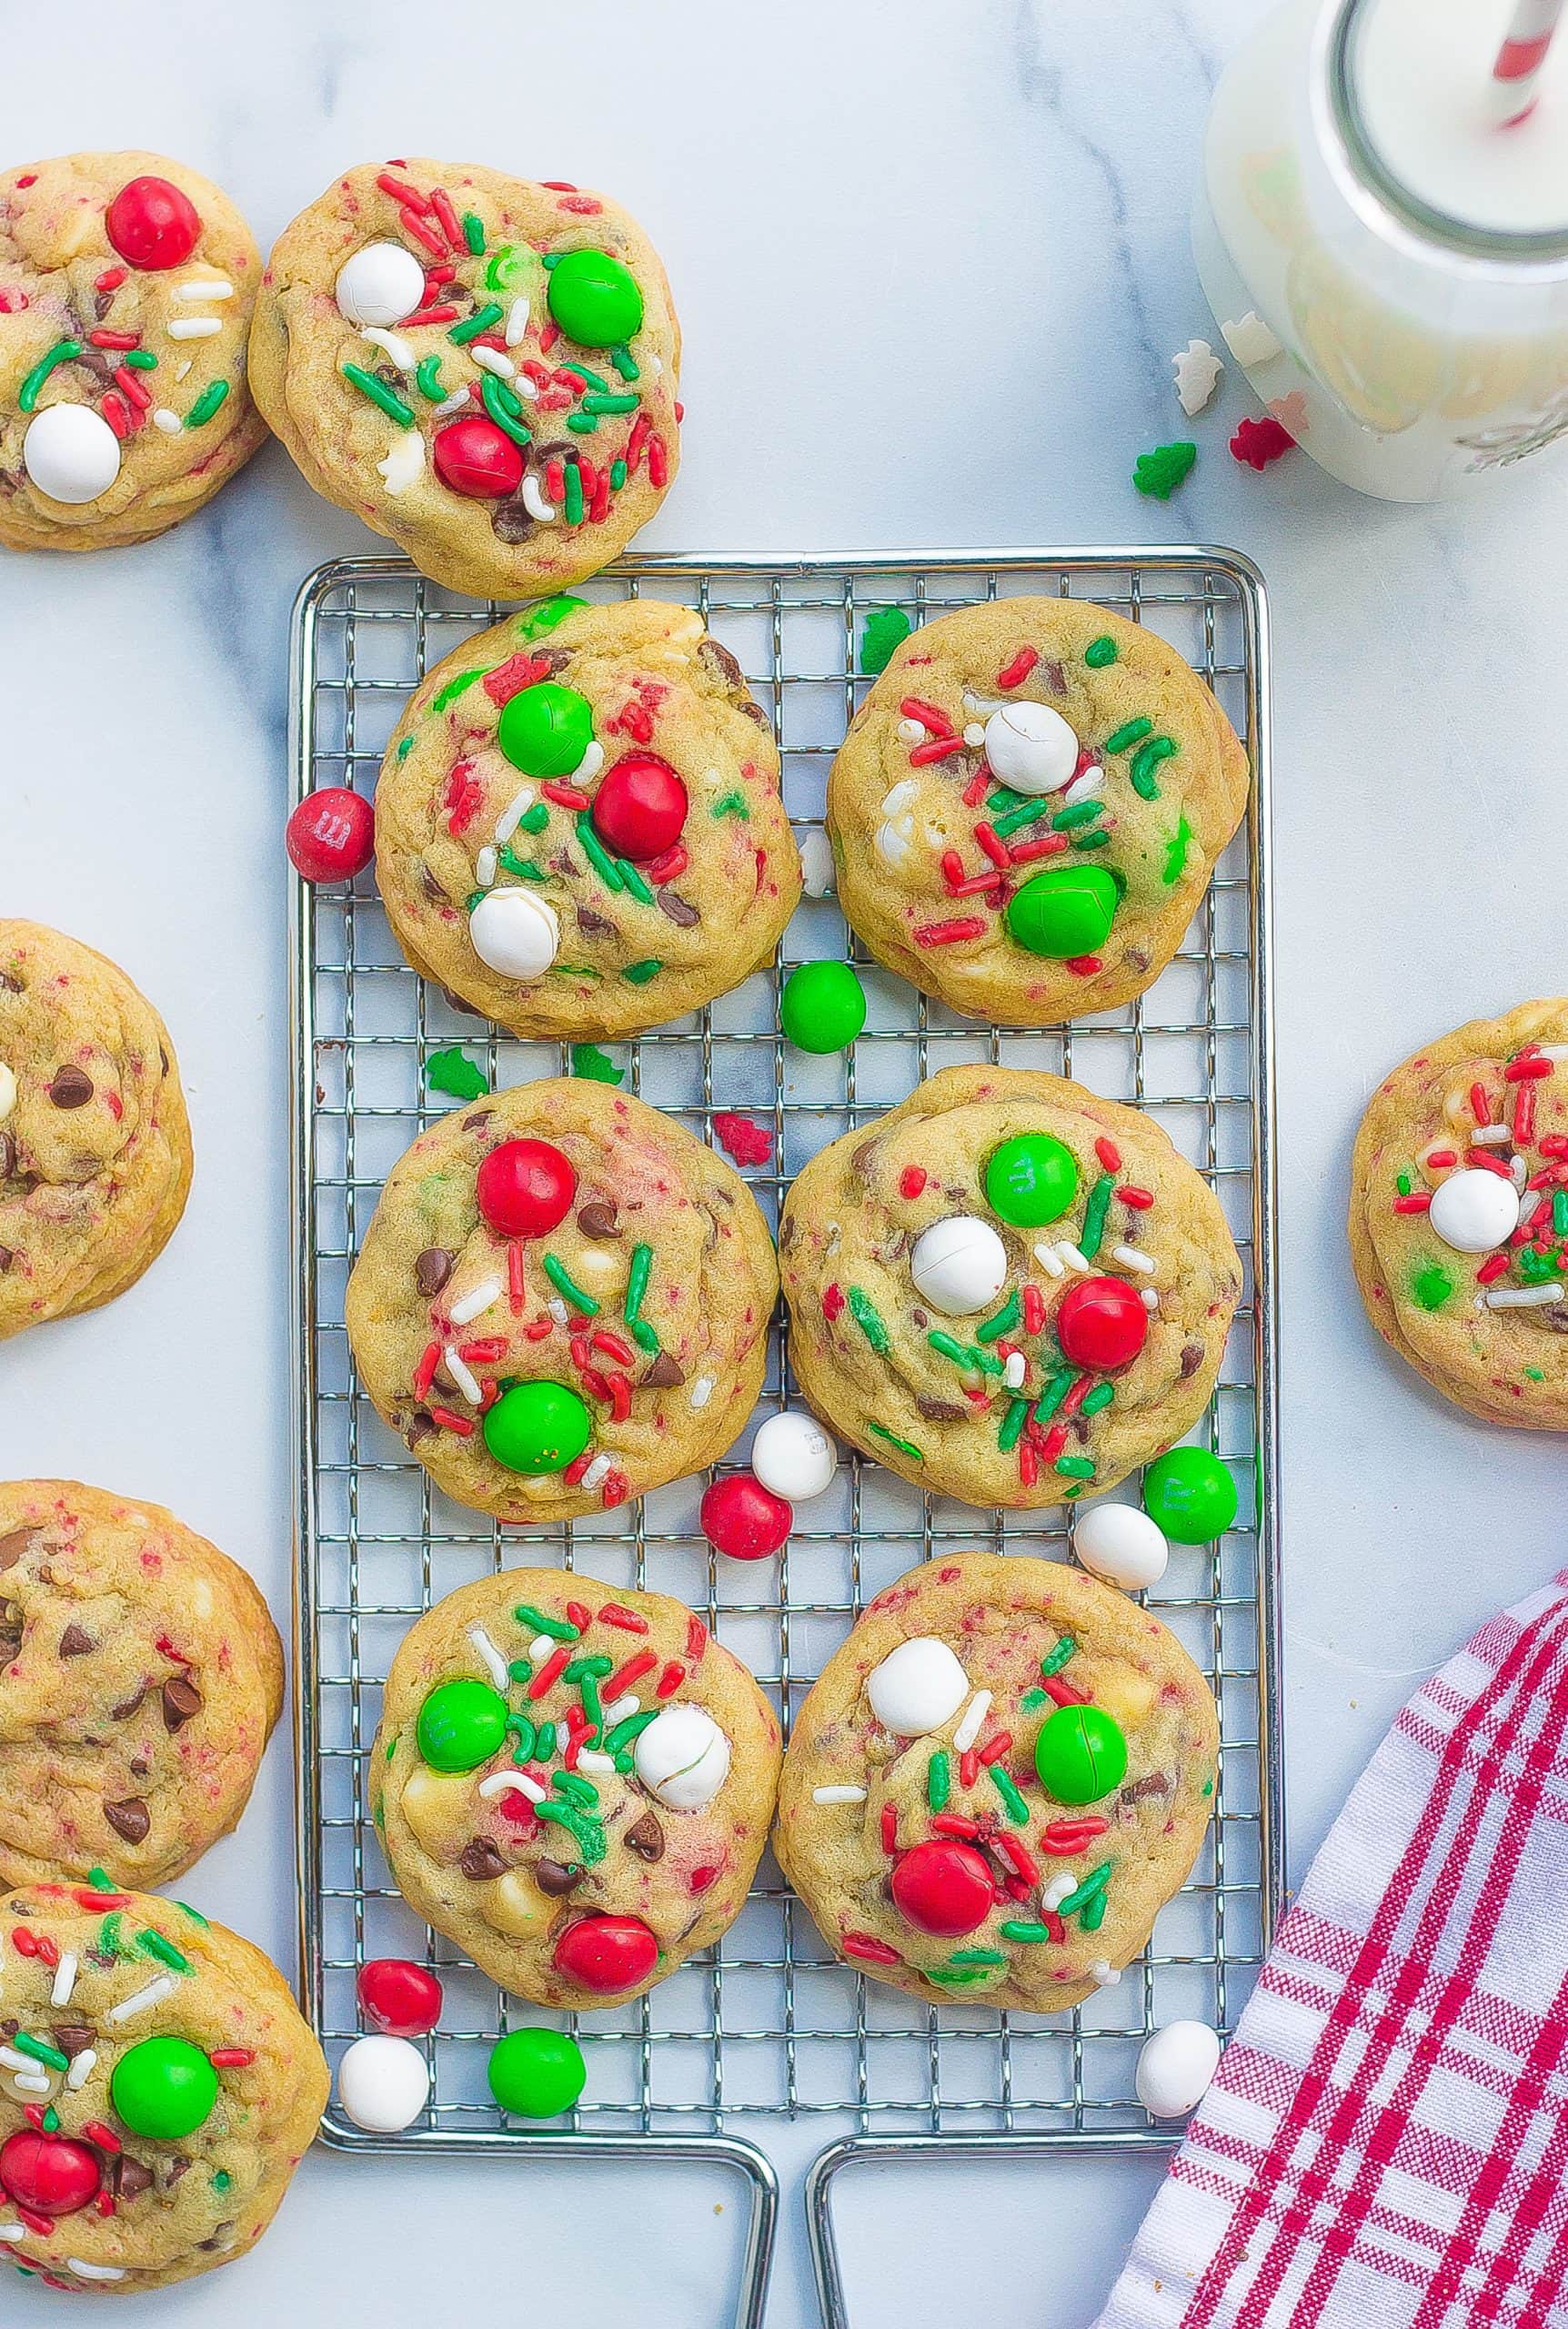 six baked cookies on wire rack with M&Ms, sprinkles, chocolate chips 